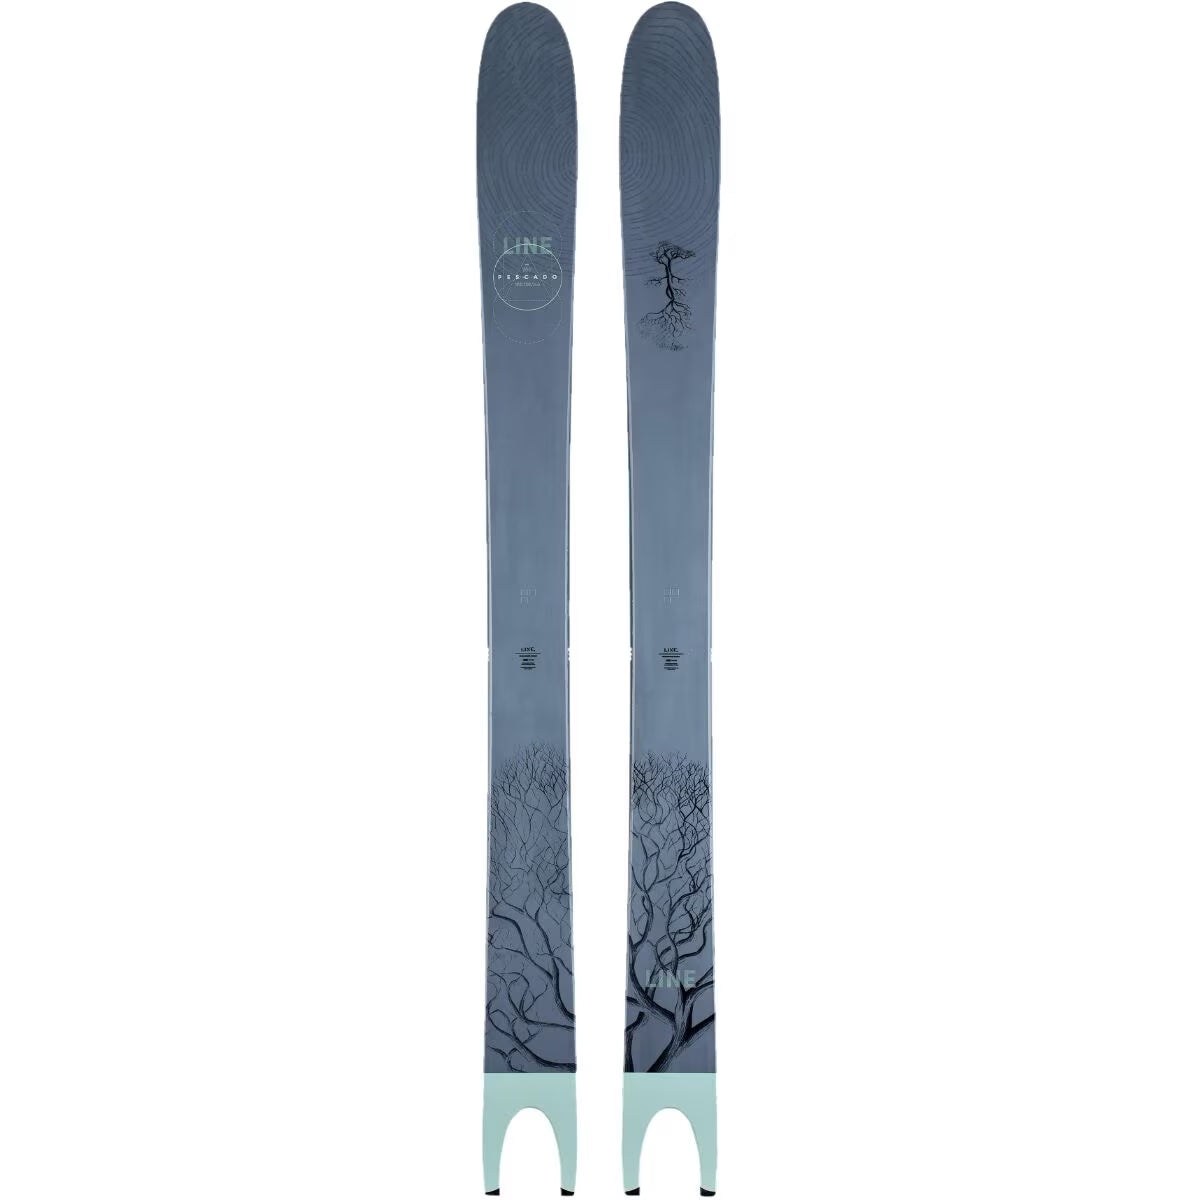 LINE Skis PESCADO 180CM, Includes Marker Griffin 13 Bindings